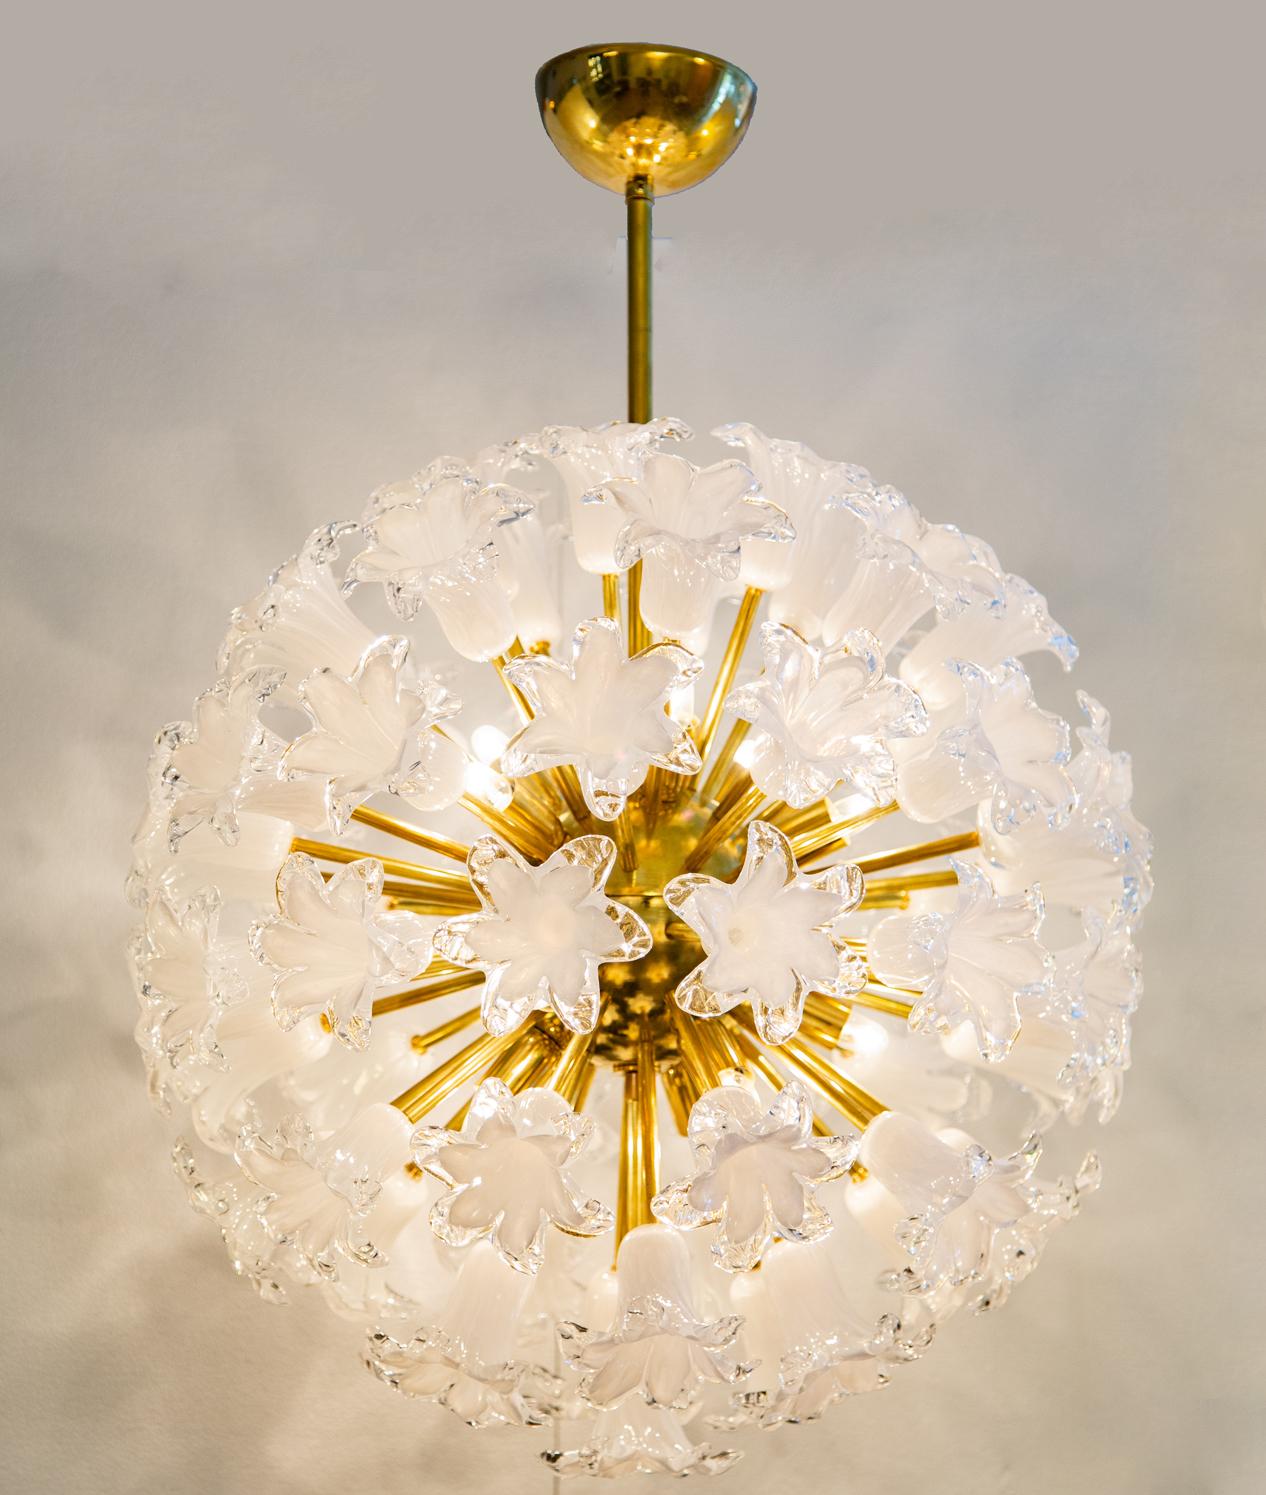 Circular sputnik with Murano glass flowers, in stock
64 opaline and clear blown glass flowers
Natural brass structure
Drop can be adjusted to your specs (quote upon request)
Stem or chain available
12 exposed E12 bulbs
Ready to ship from our